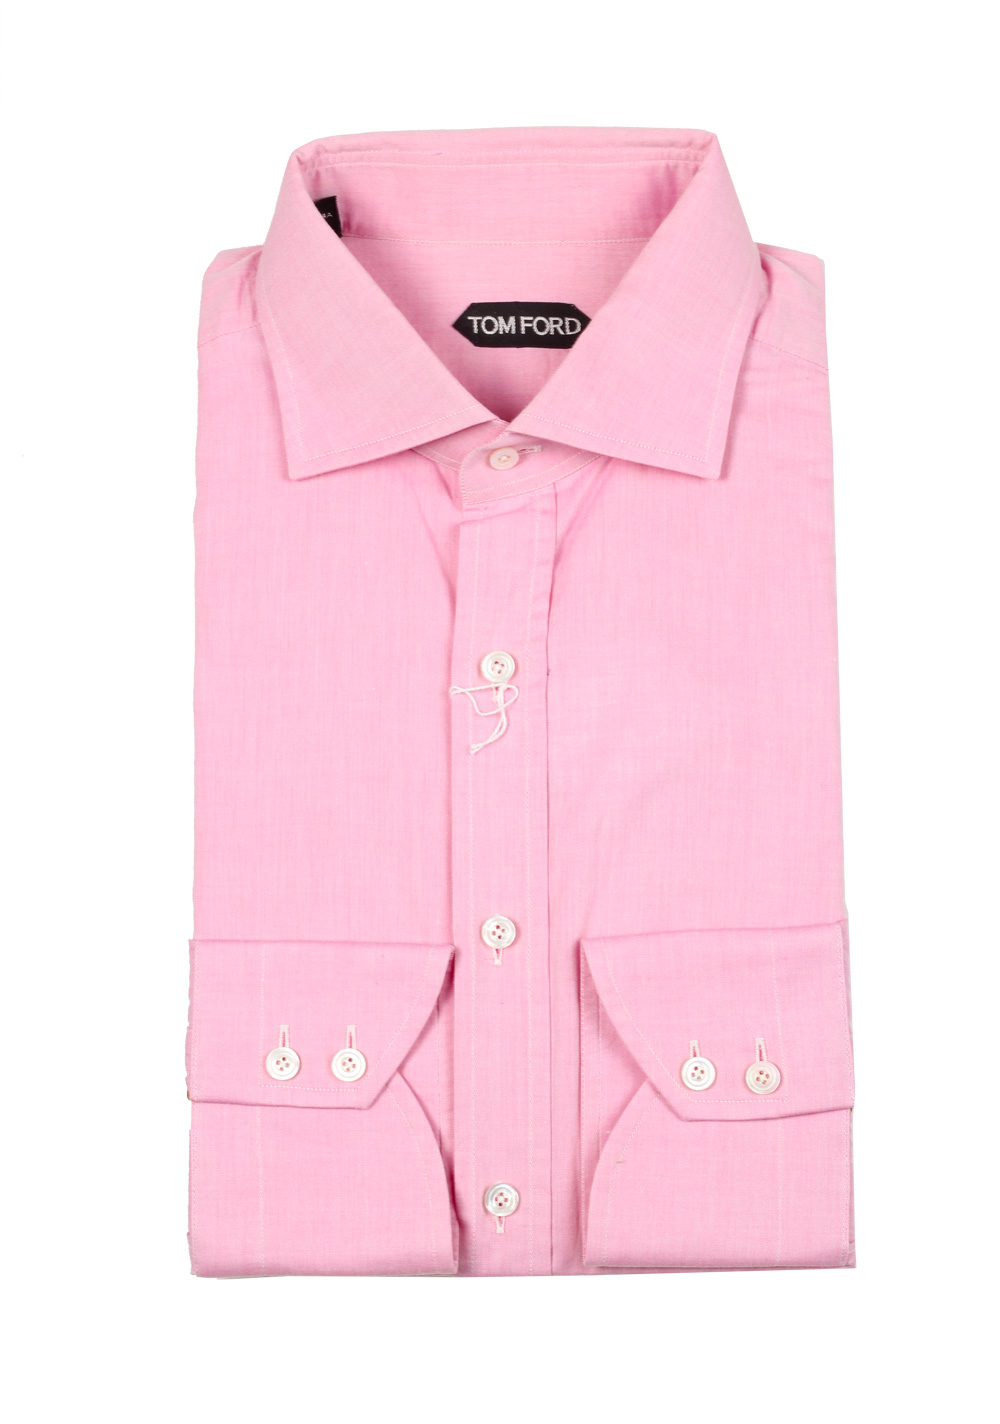 TOM FORD Solid Pink Shirt Size 43 / 17 U.S. | Costume Limité